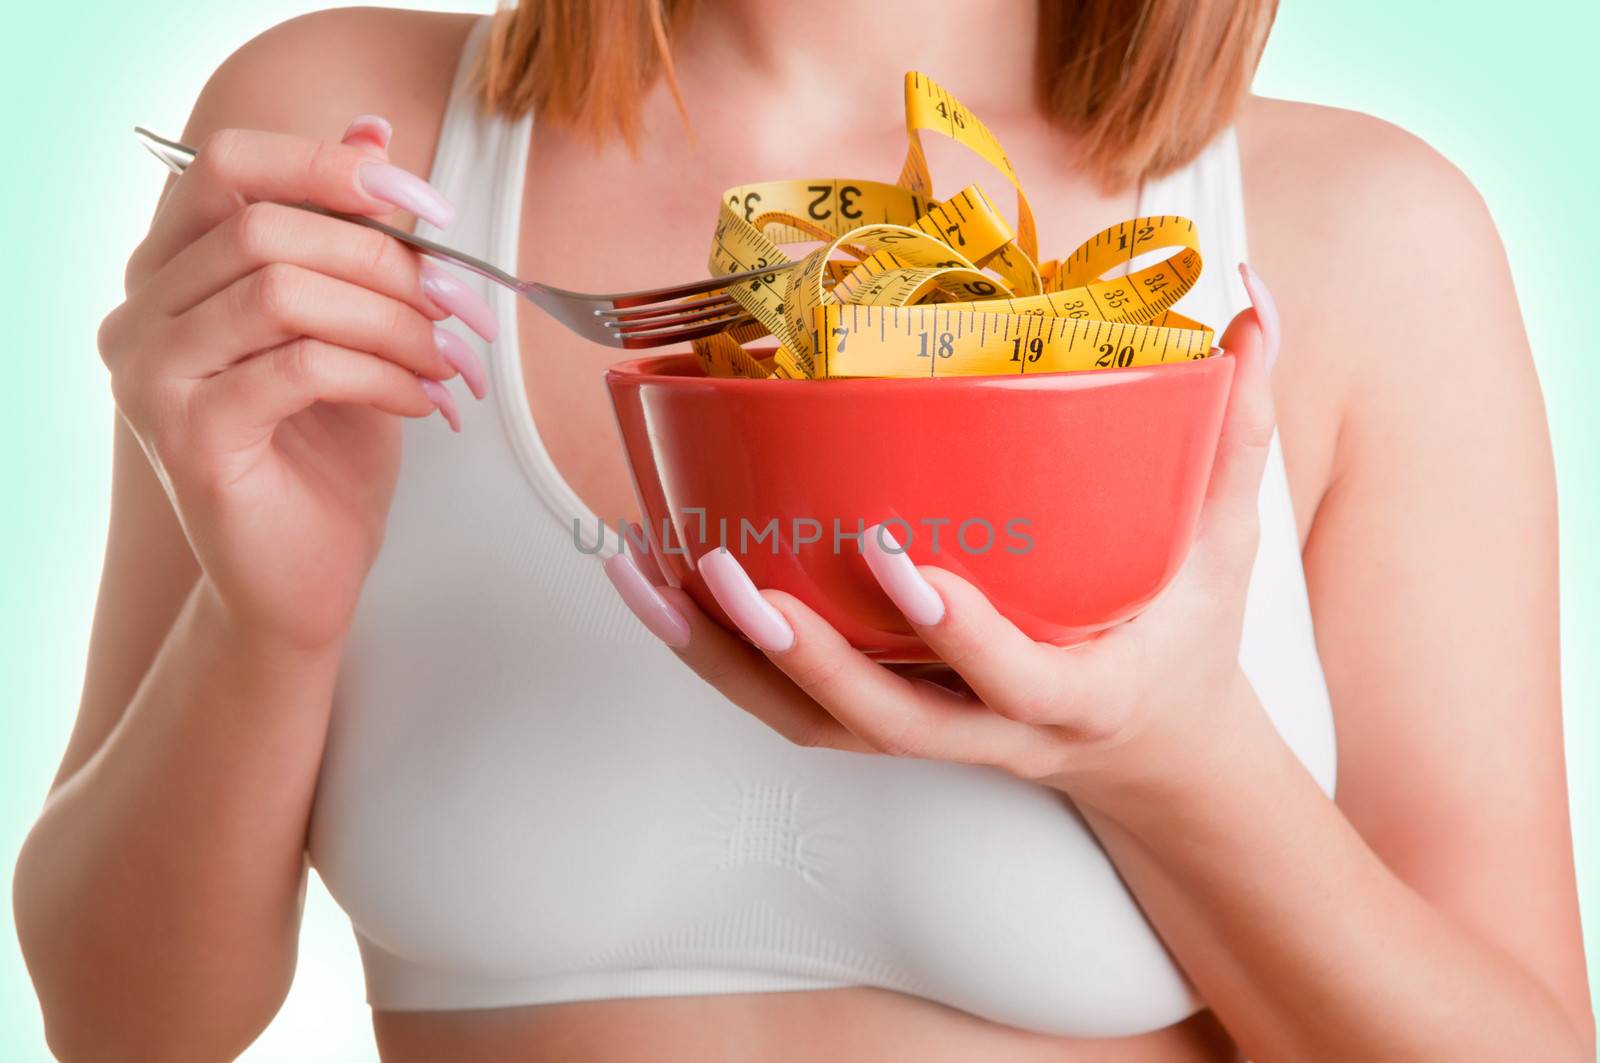 Woman eating a bowl of measruring tapes. Diet concept.